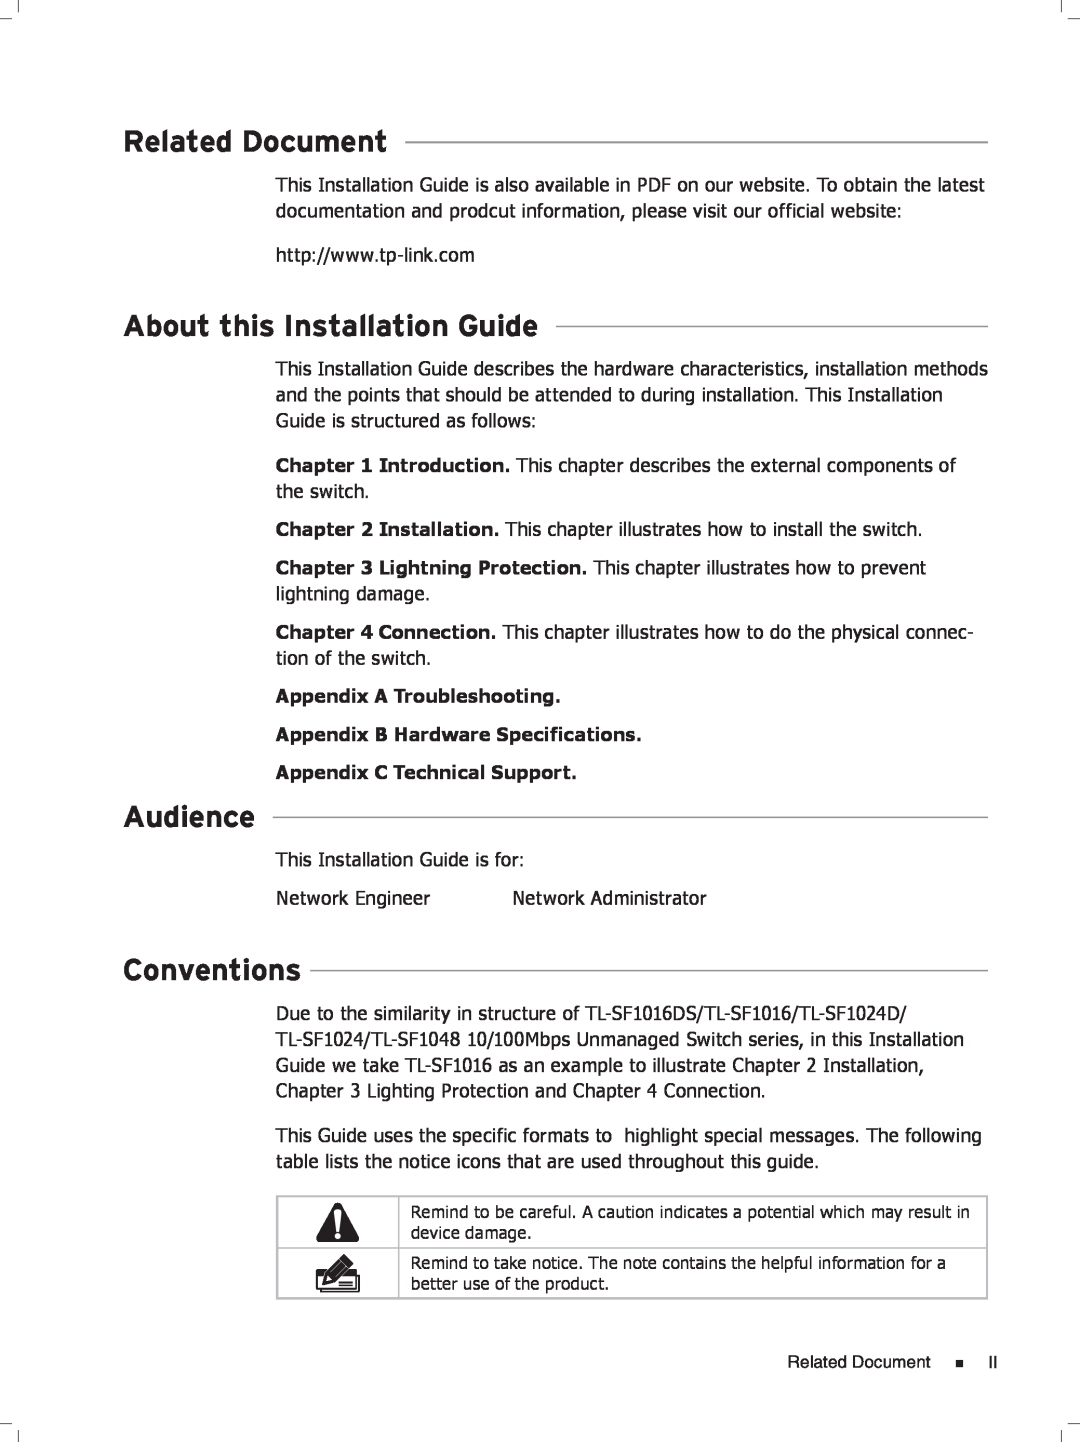 TP-Link TL-SF1016 Related Document, About this Installation Guide, Audience, Conventions, Appendix C Technical Support 